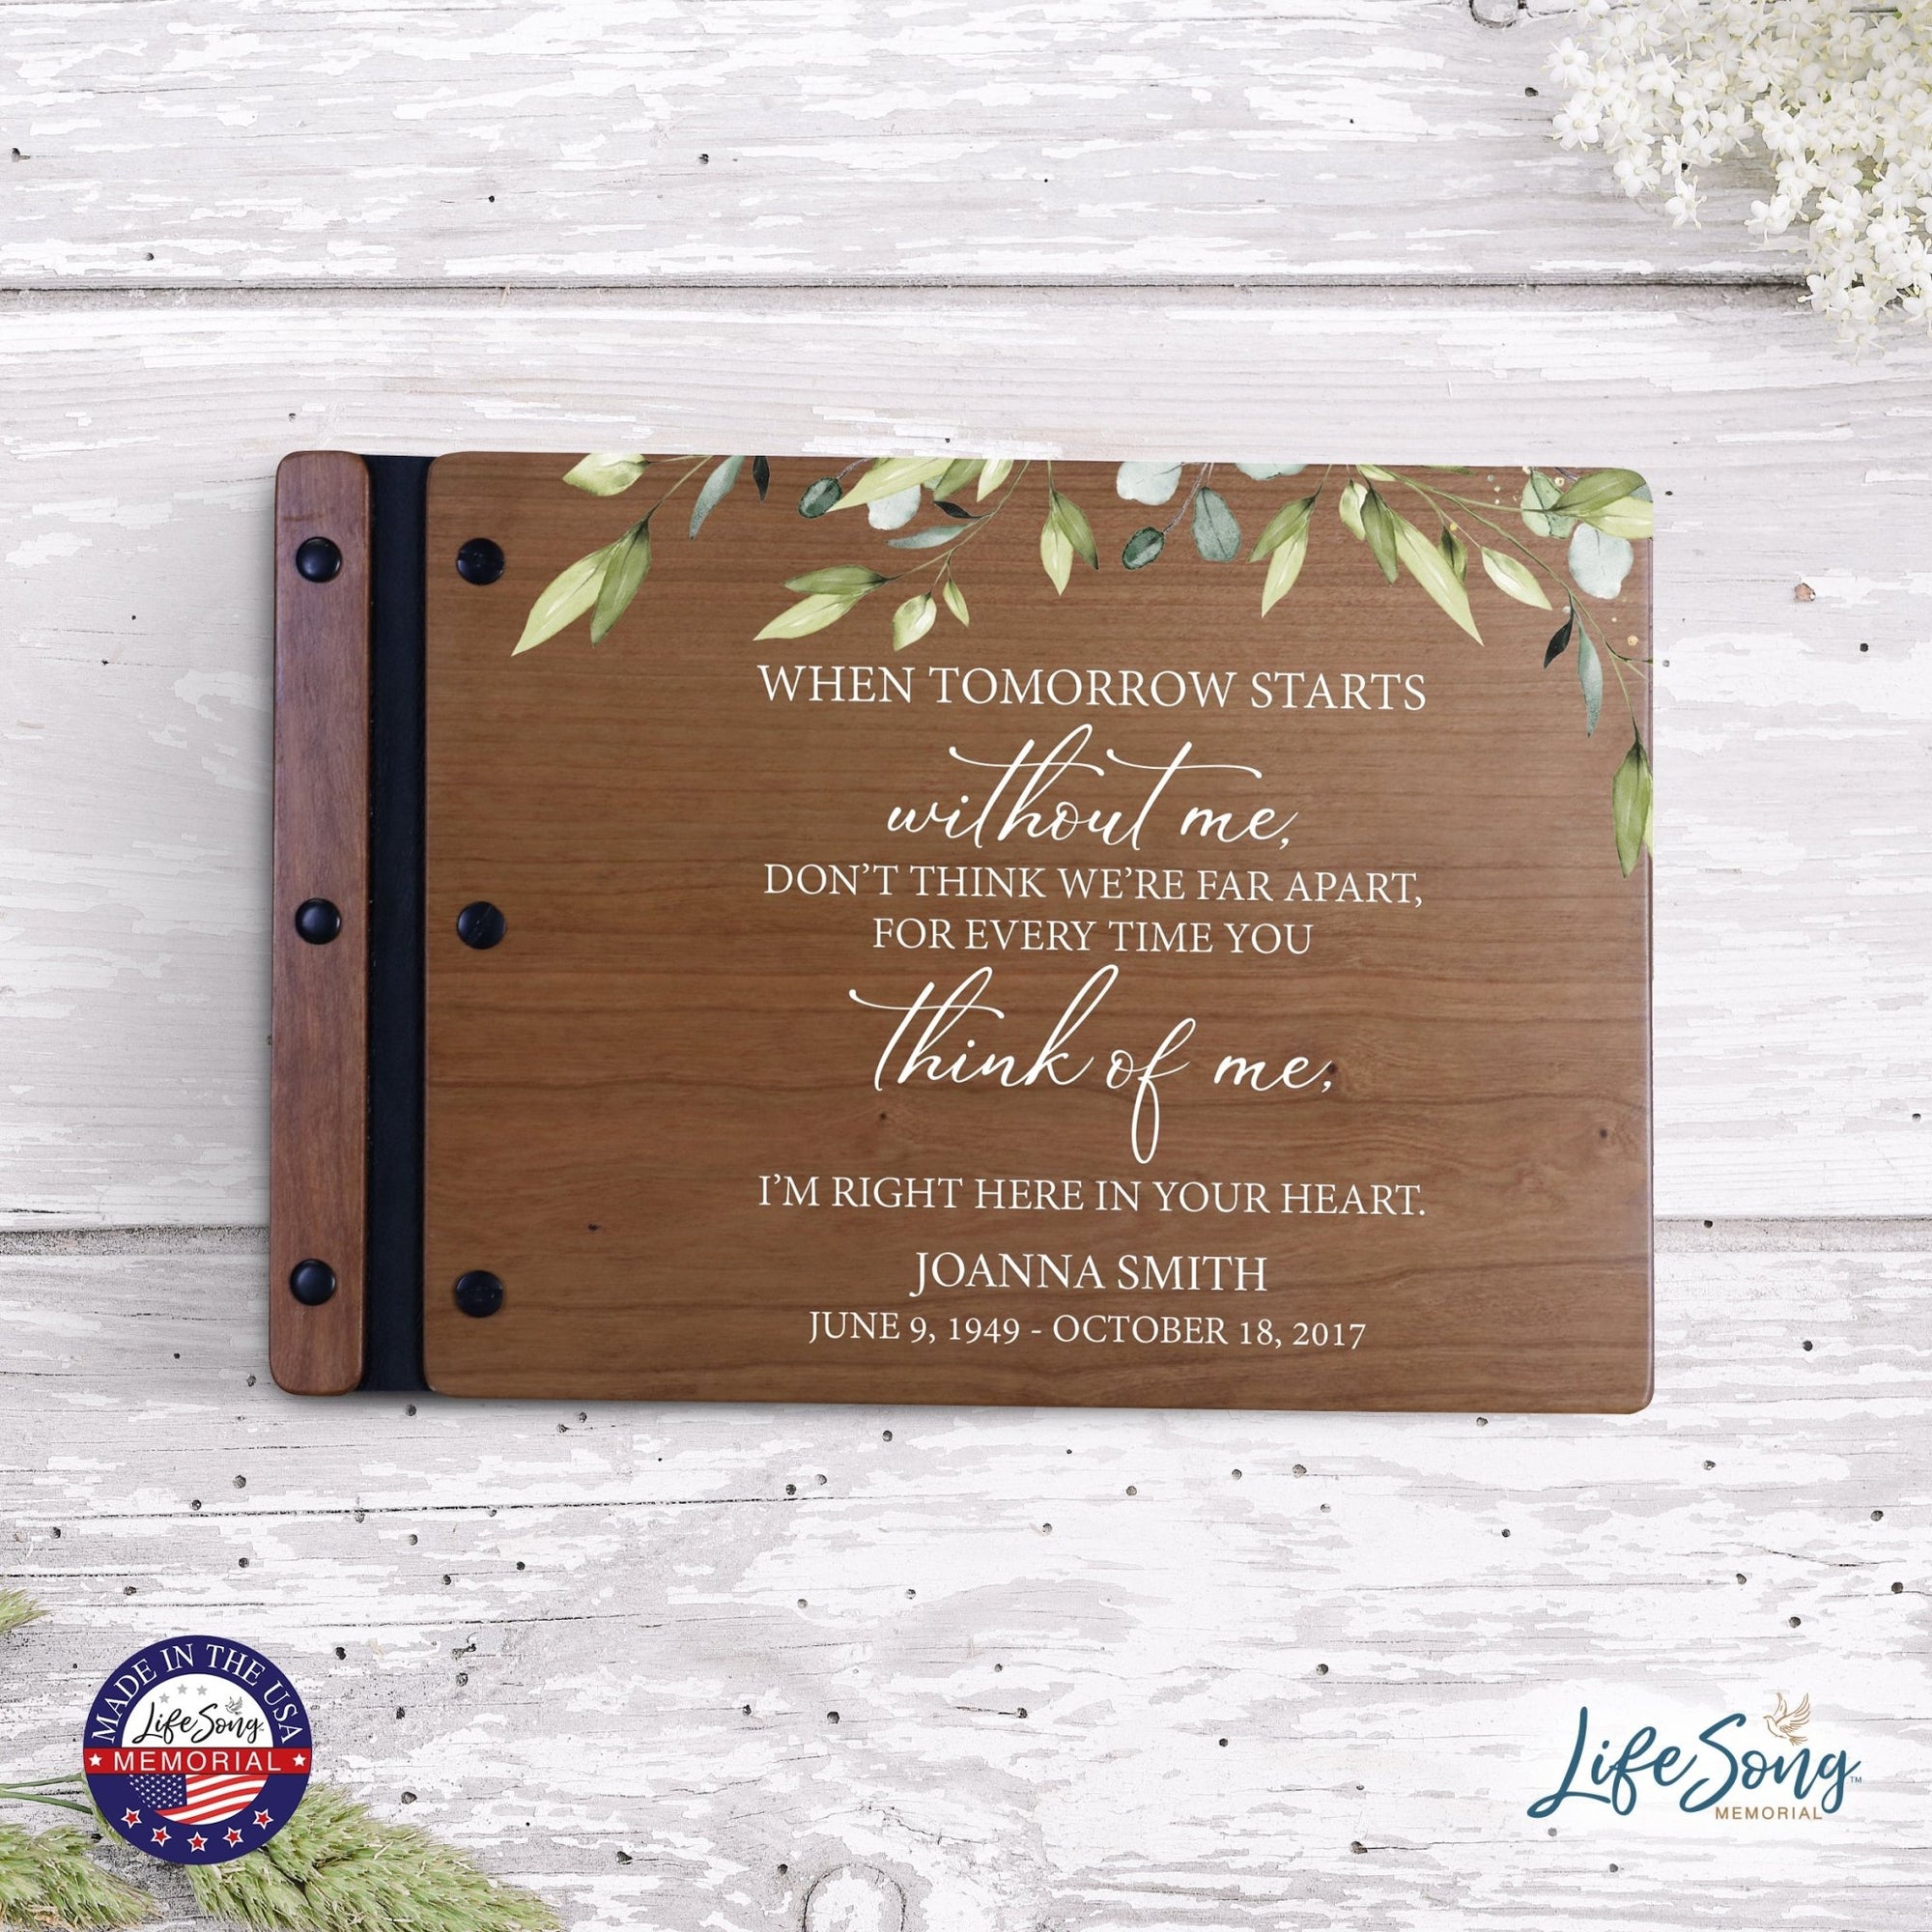 Personalized Medium Wooden Memorial Guestbook 12.375x8.5 - When Tomorrow Starts - LifeSong Milestones